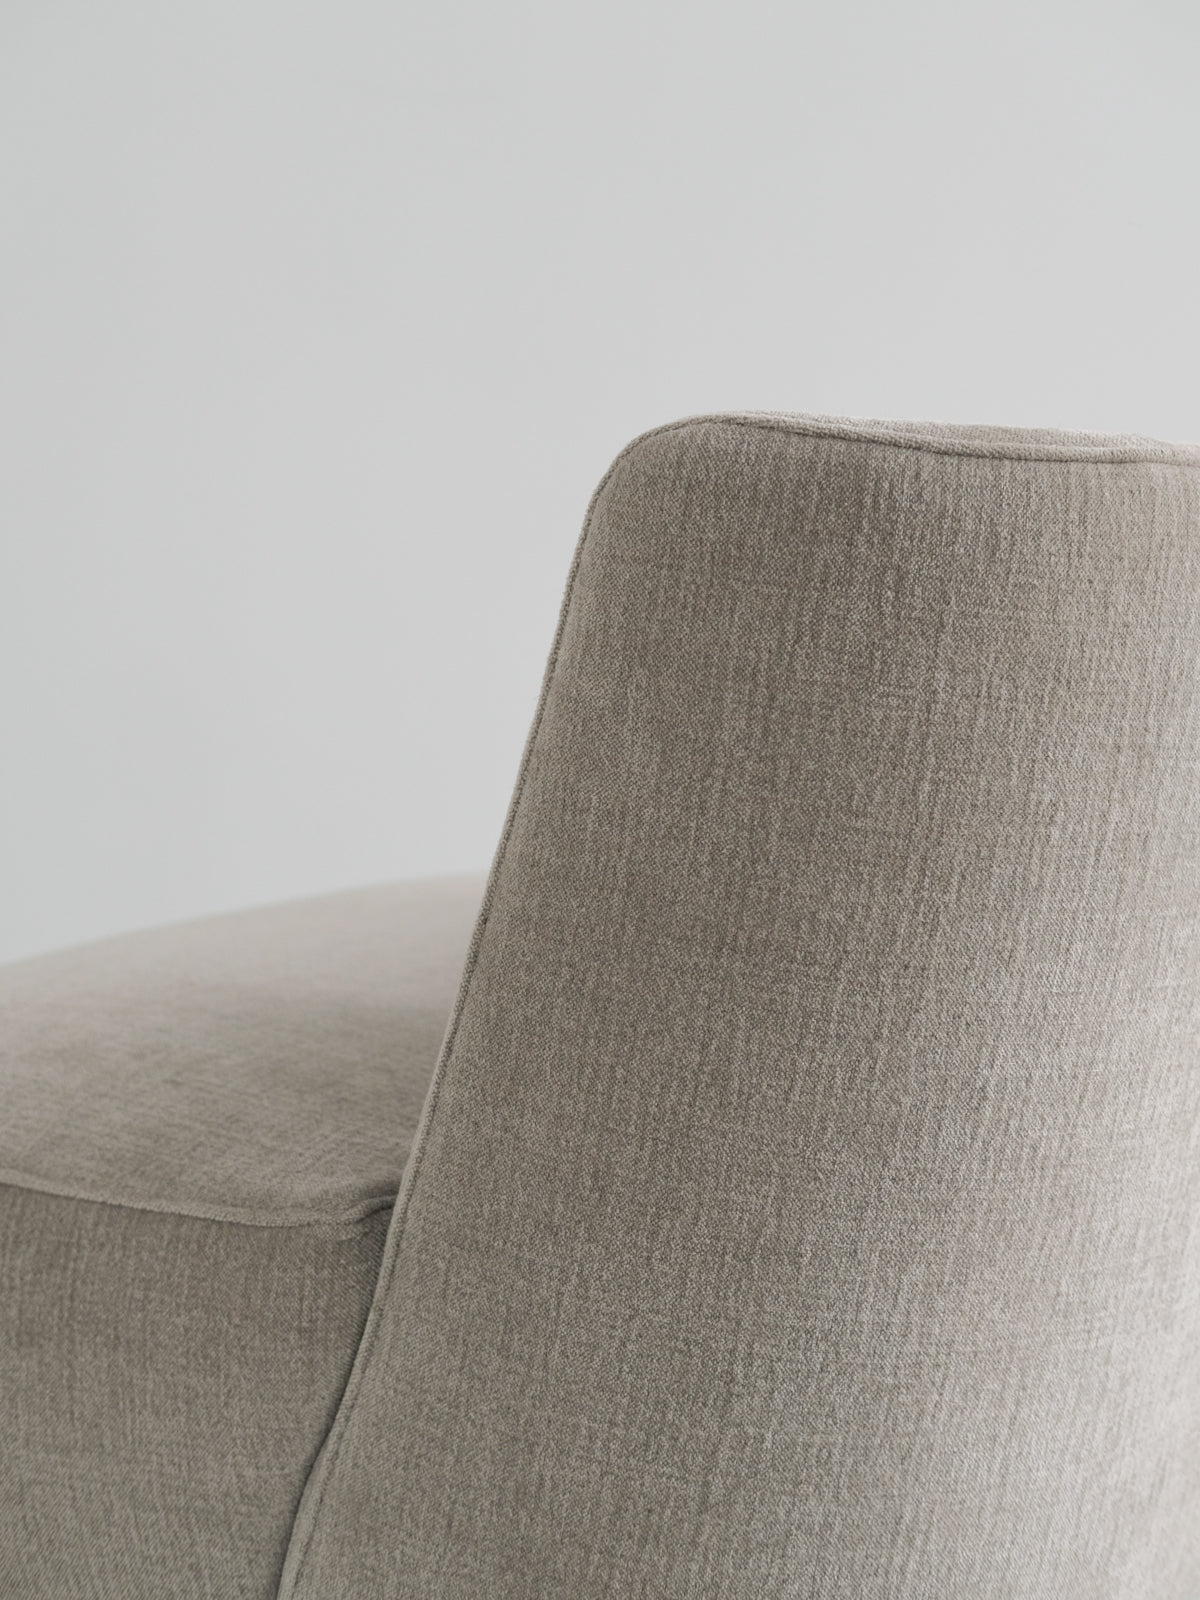 Isabelle Armchair